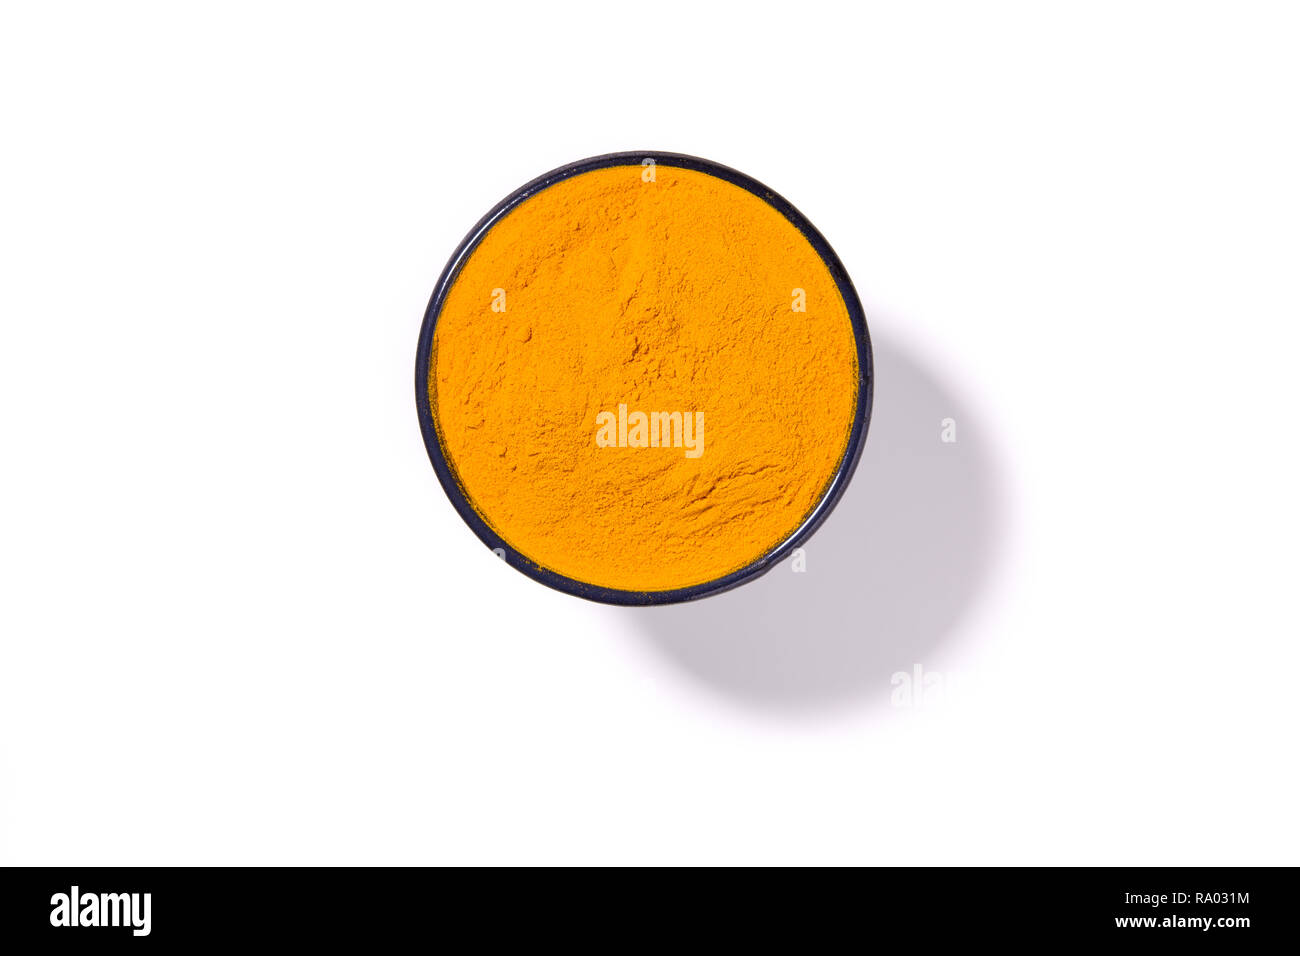 Curcuma turmeric spice powder in round bowl isolated with shadow on white background, view directly from above. Stock Photo